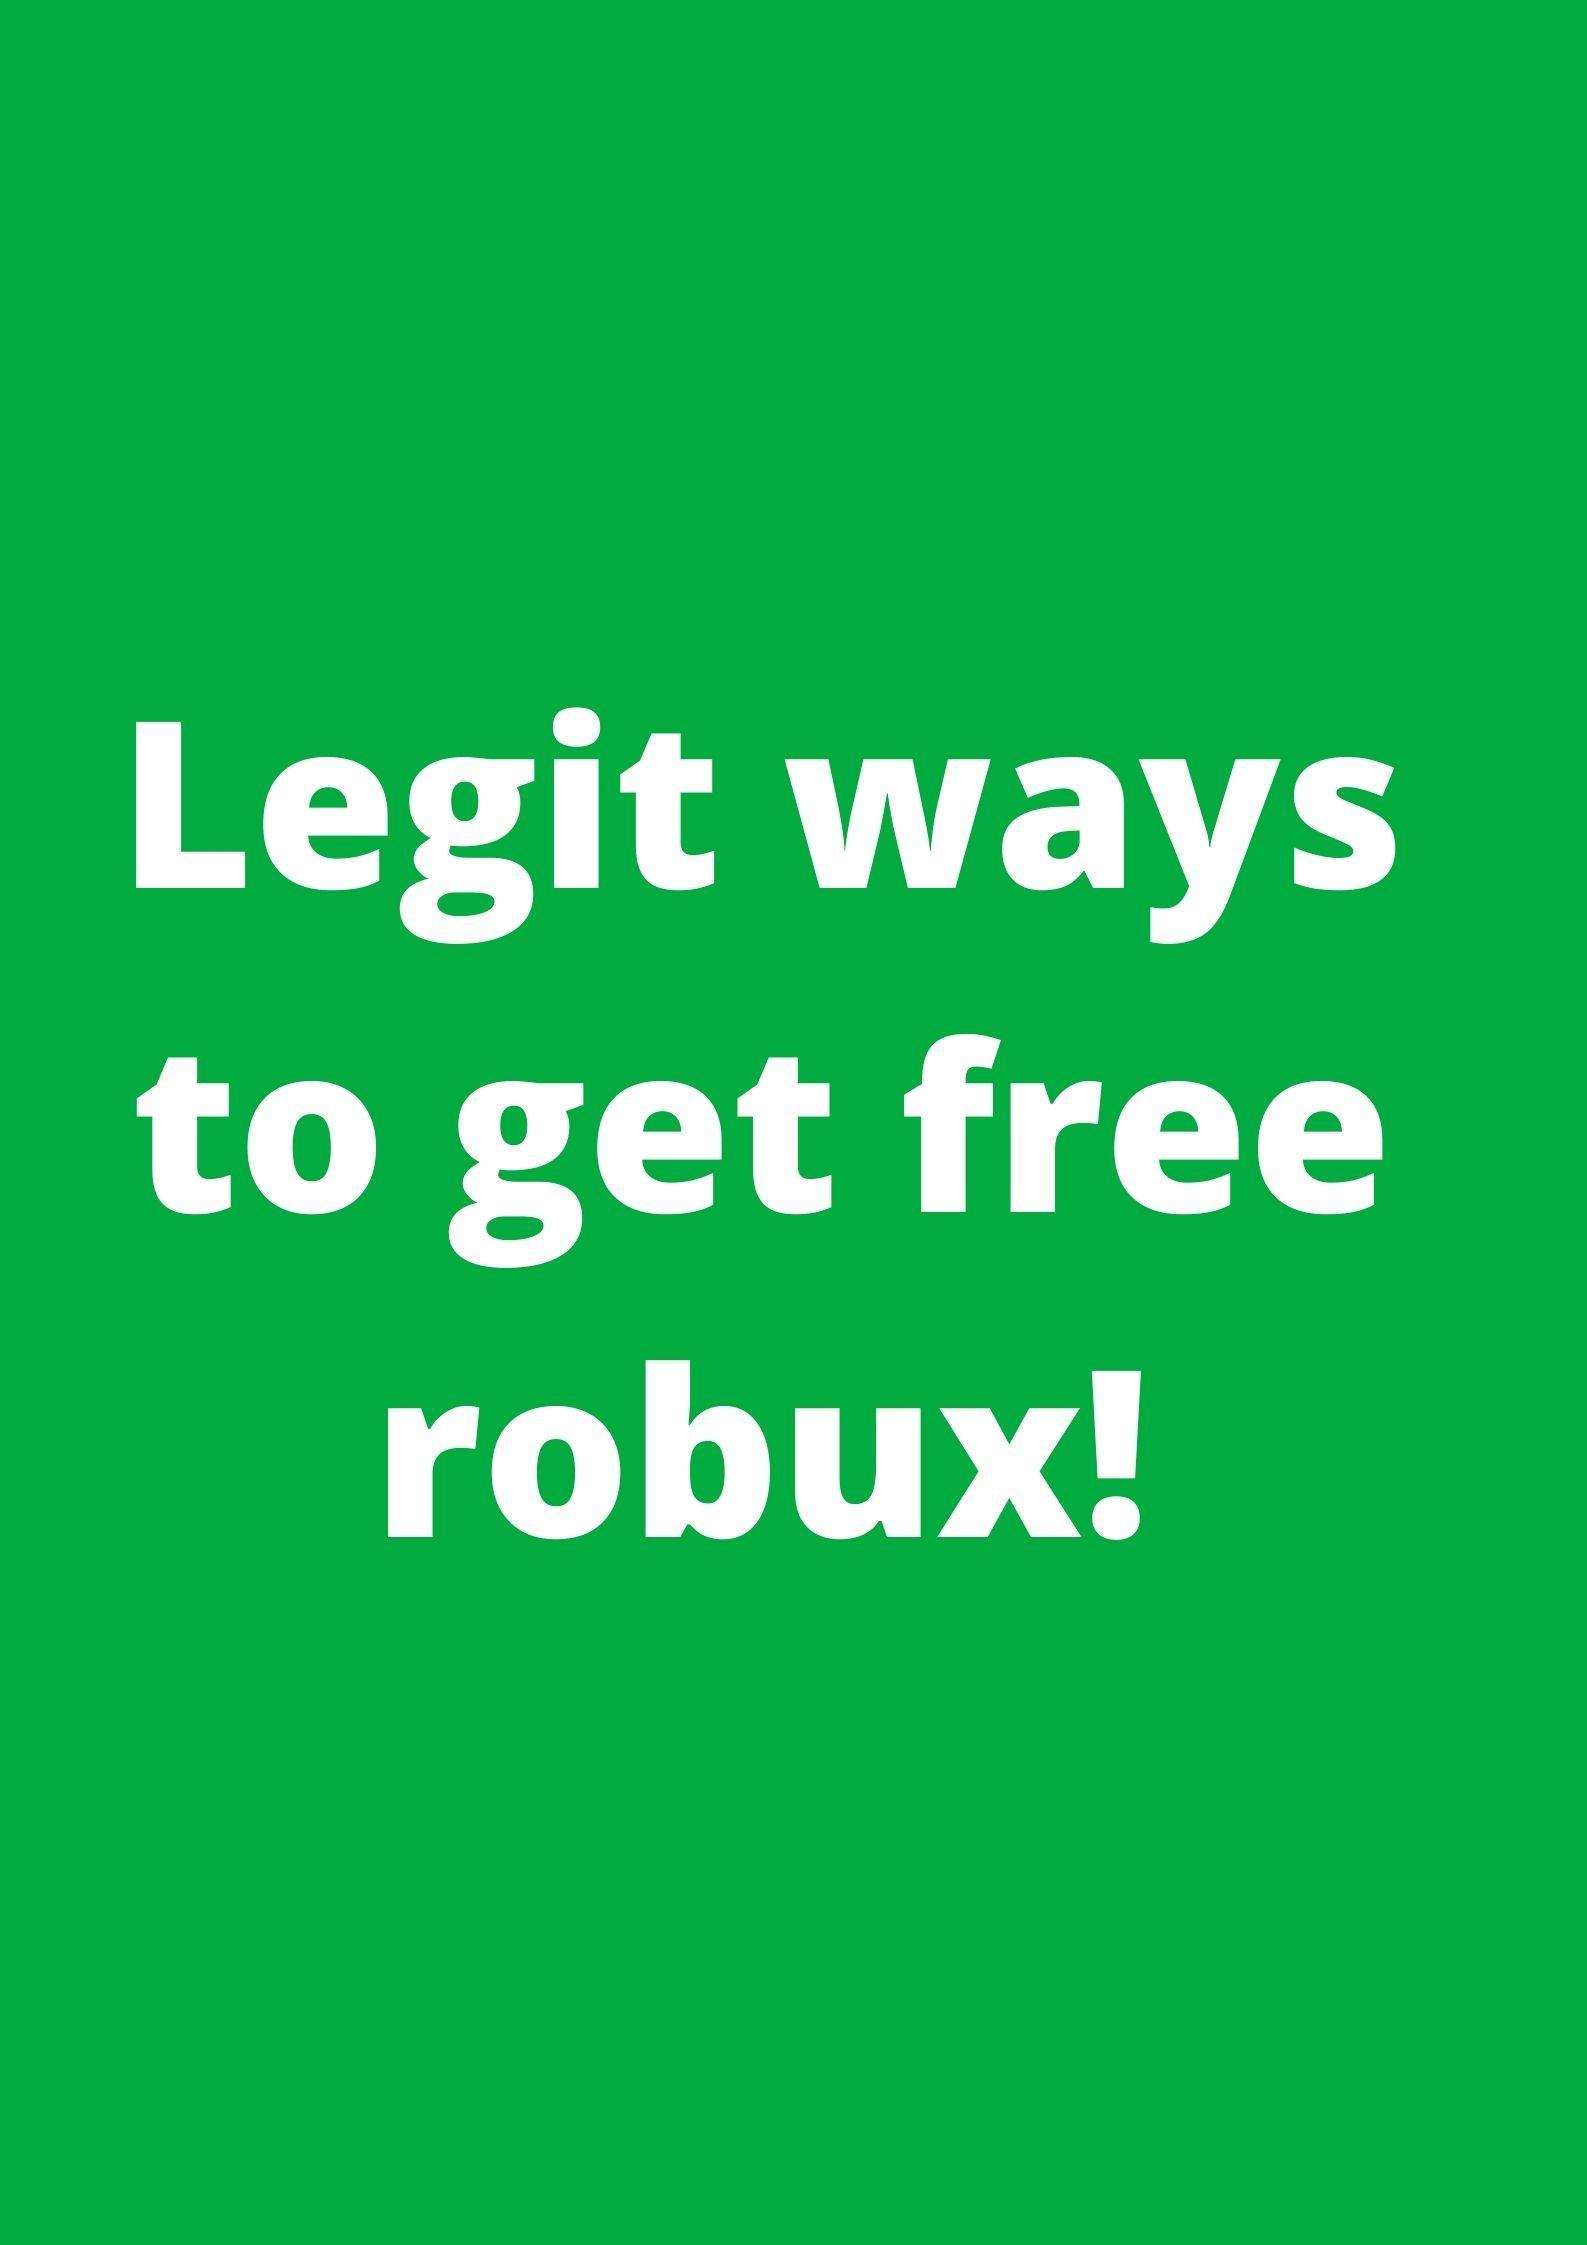 Free Robux Codes Guides 2020 For Android Apk Download - legit ways to get free robux 2020